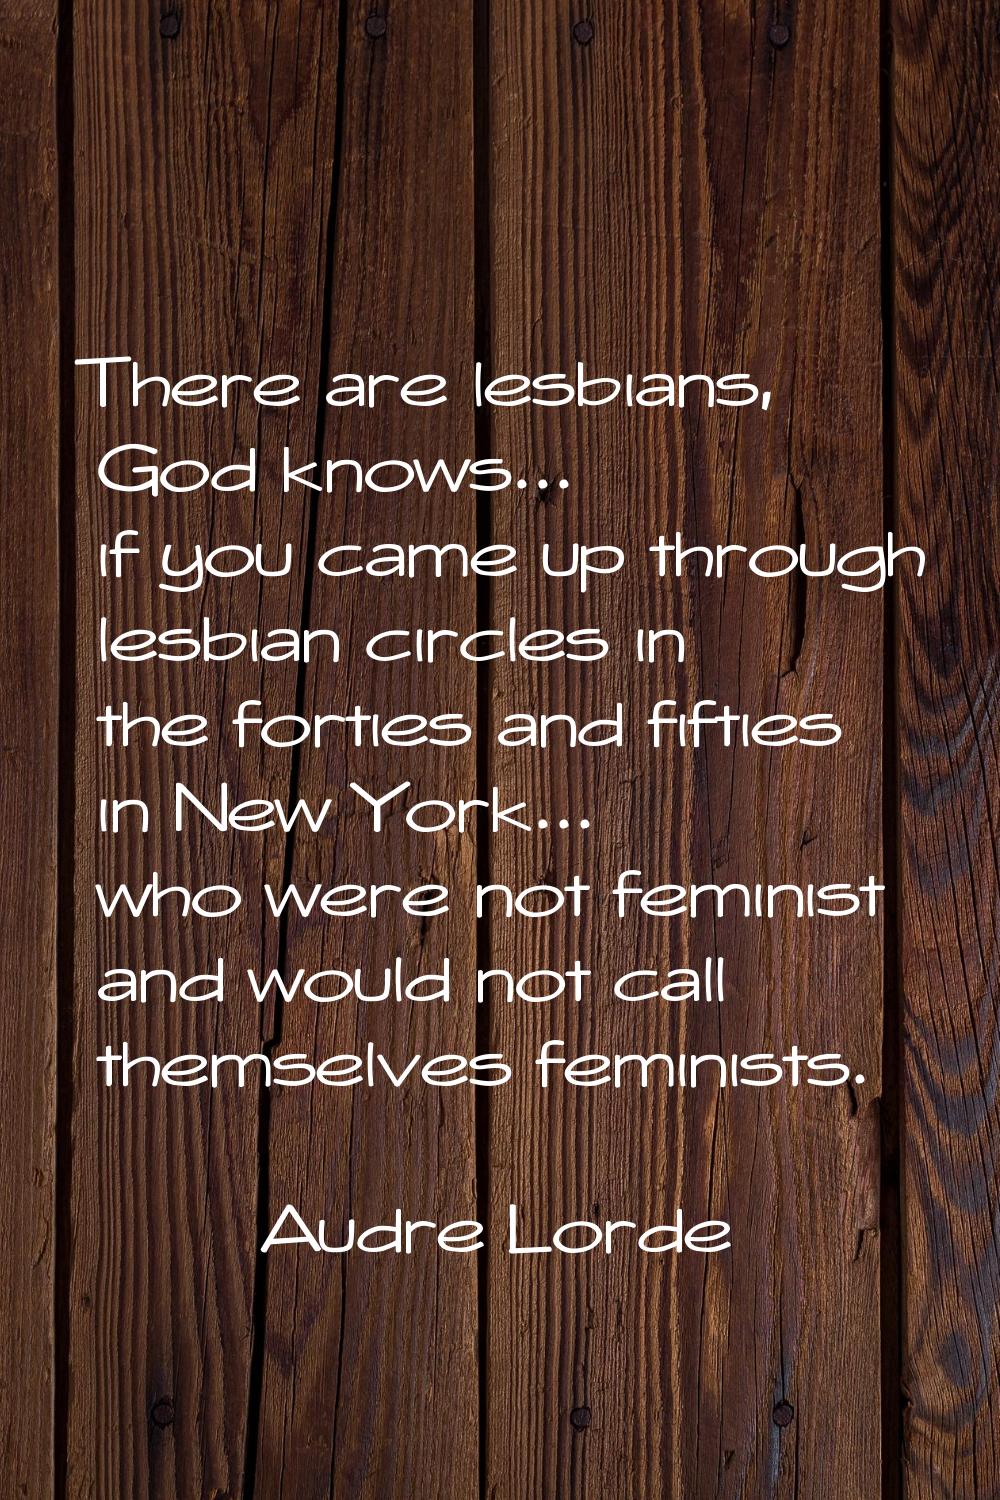 There are lesbians, God knows... if you came up through lesbian circles in the forties and fifties 